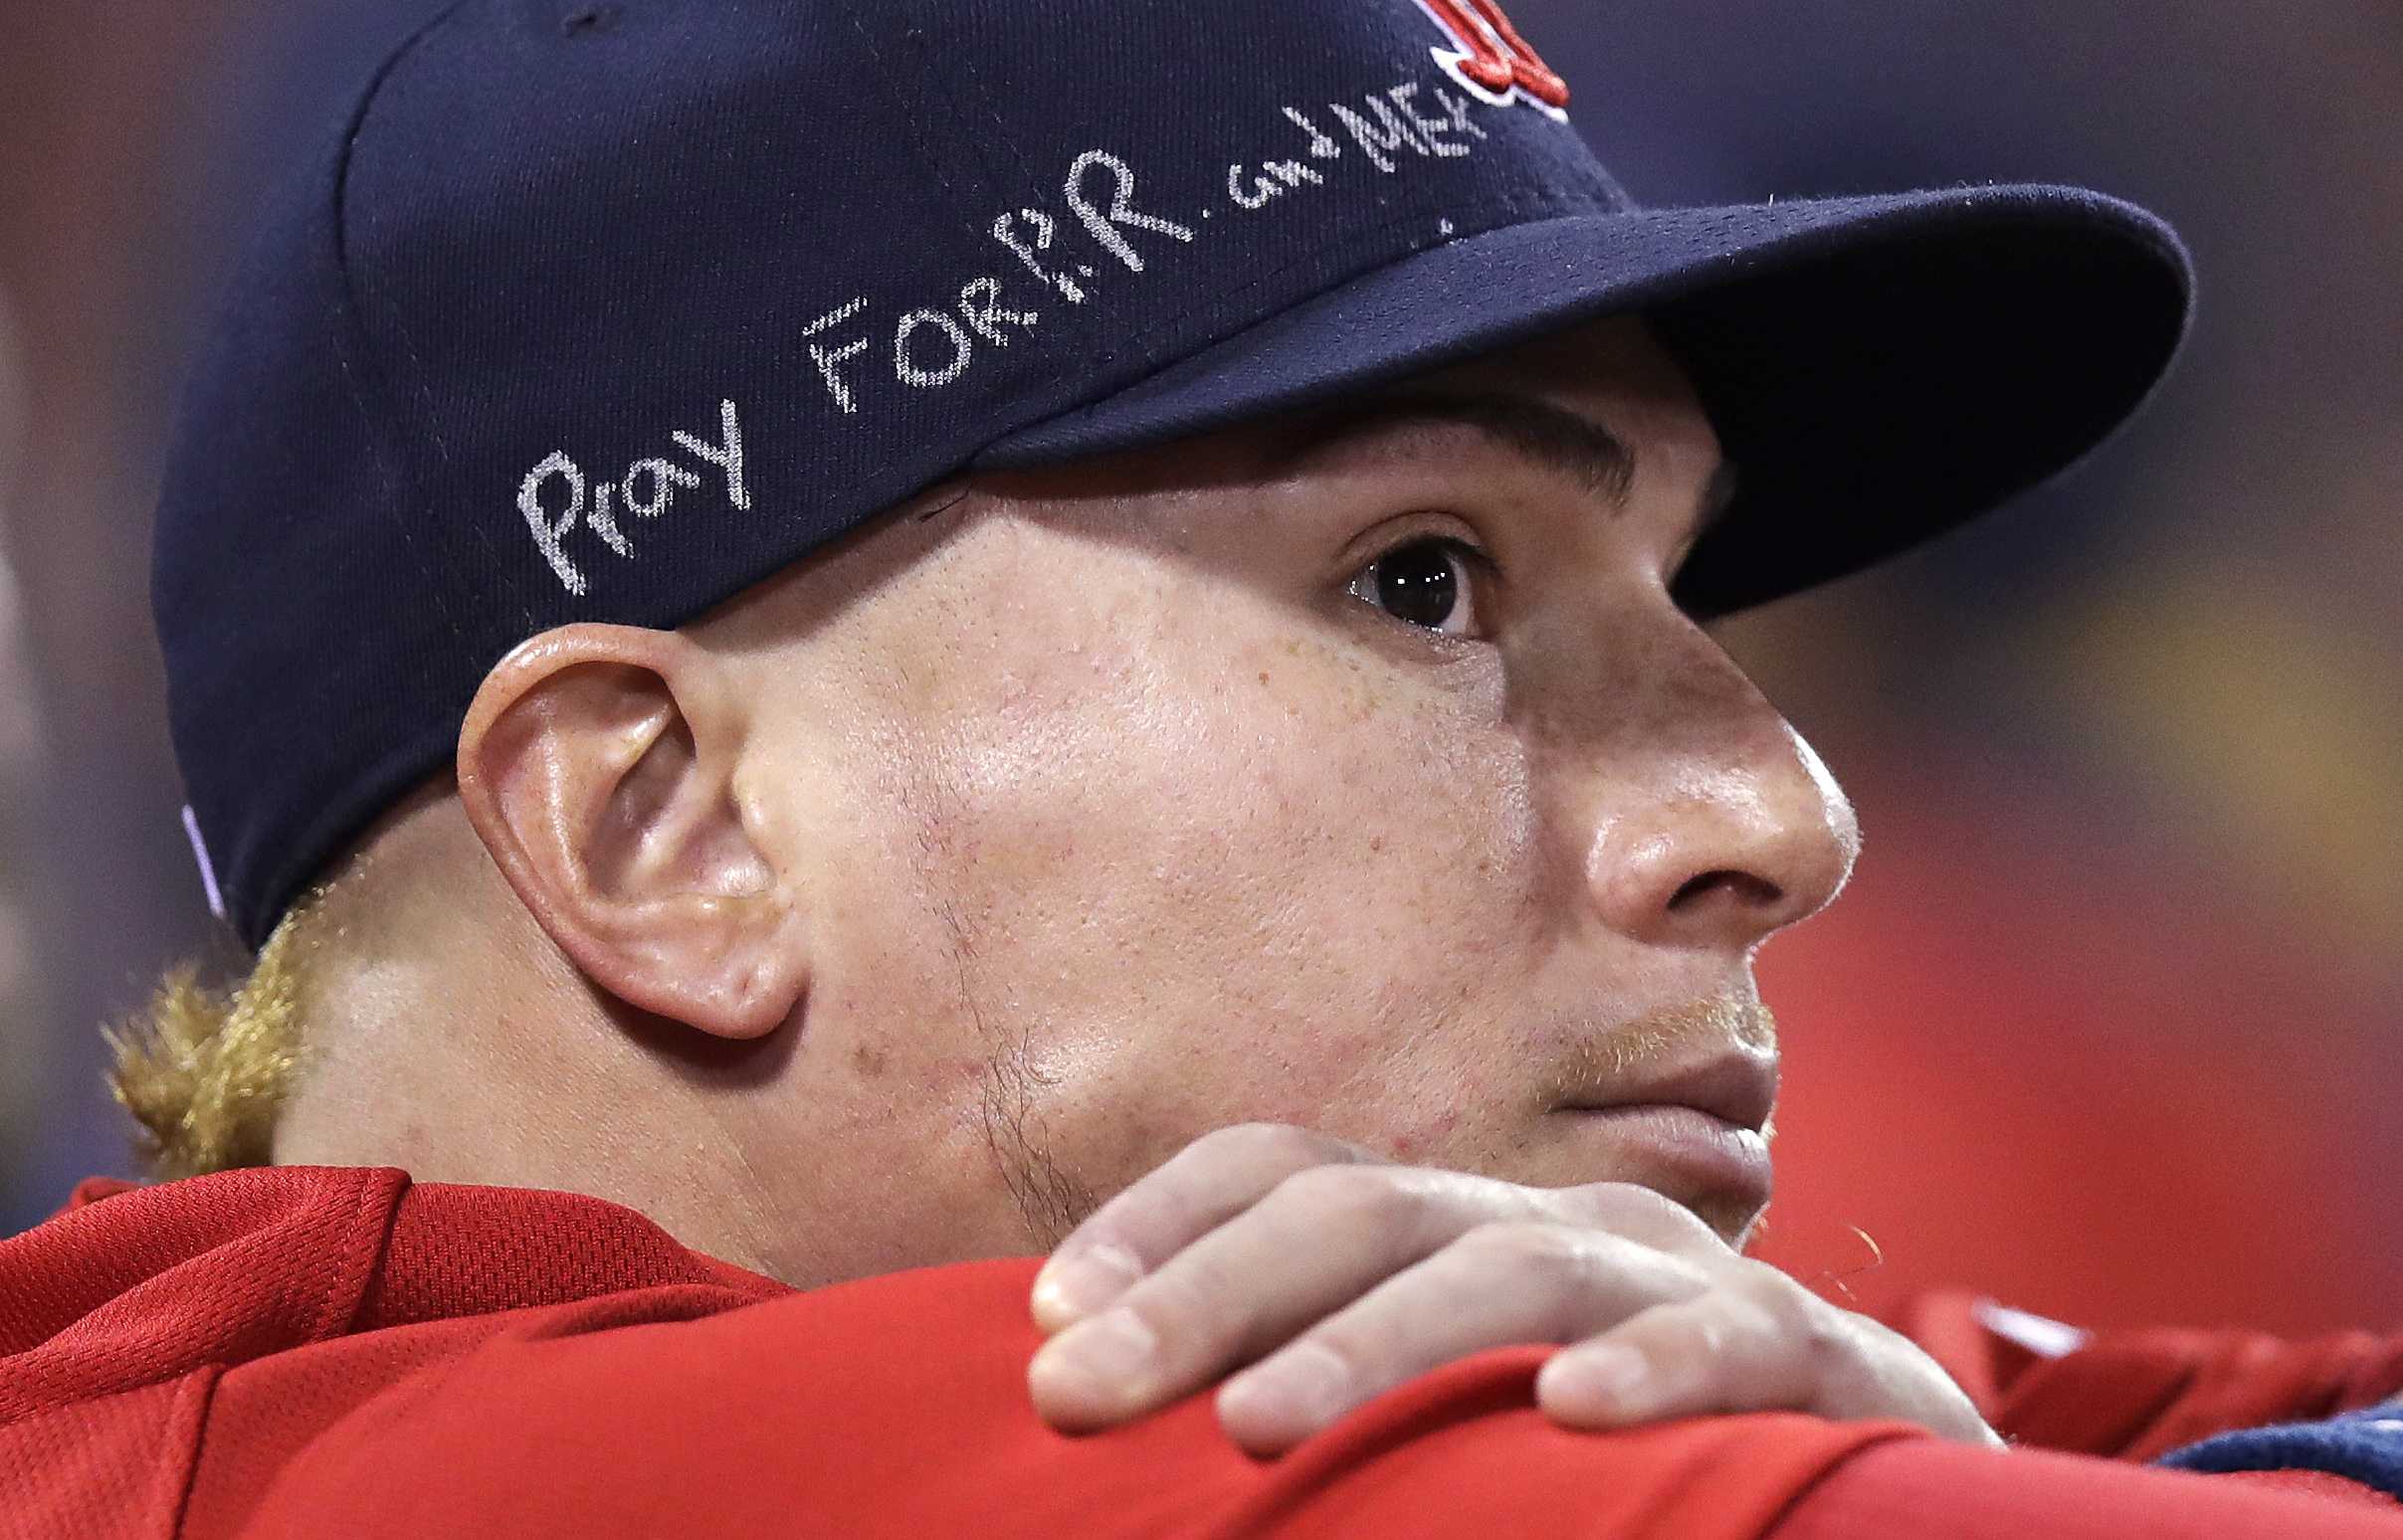 Christian Vazquez to have surgery on fractured pinky